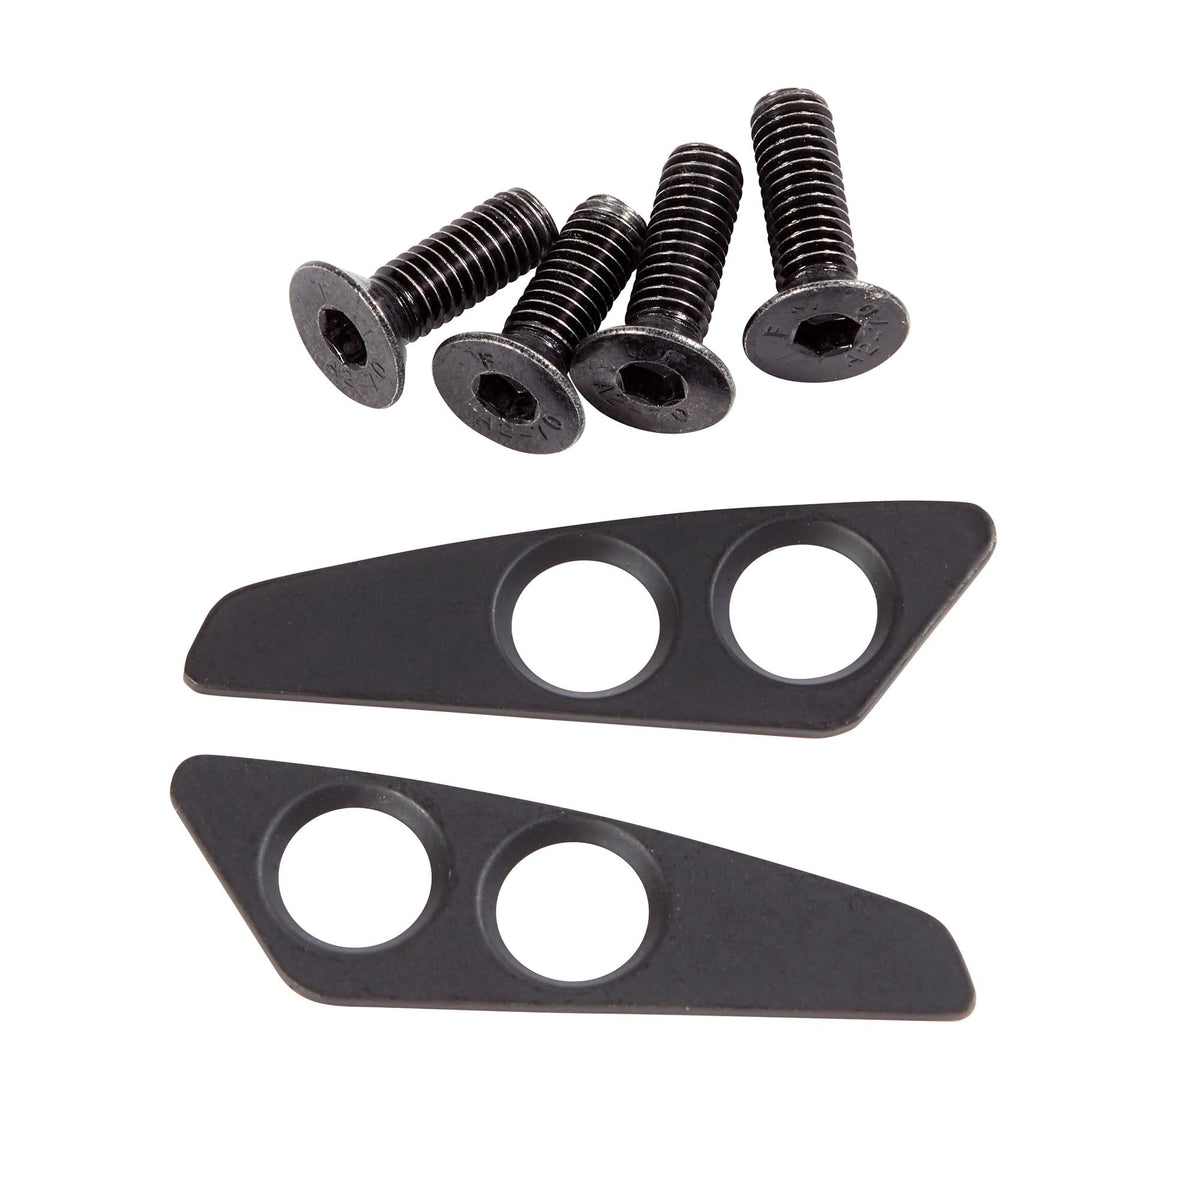 Boosted Replacement Motor Driver Screws / Wings for Boosted Boards